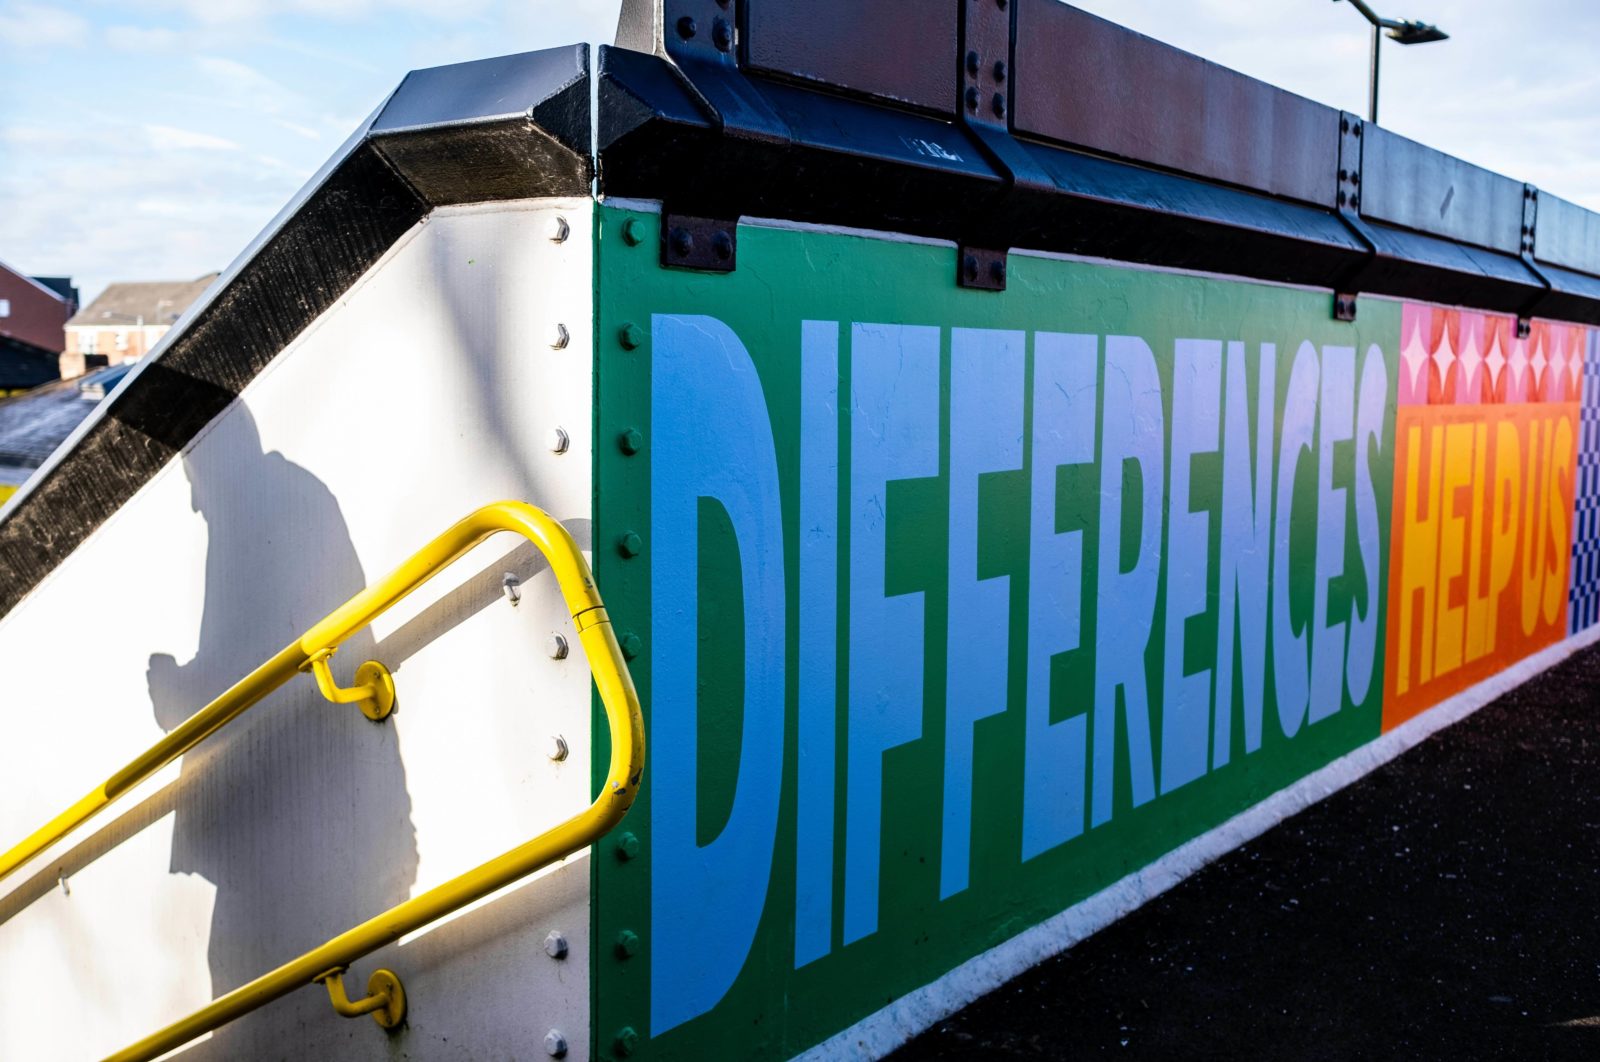 Part of the mural is photographed from up close, the words 'Differences help us' can be seen.